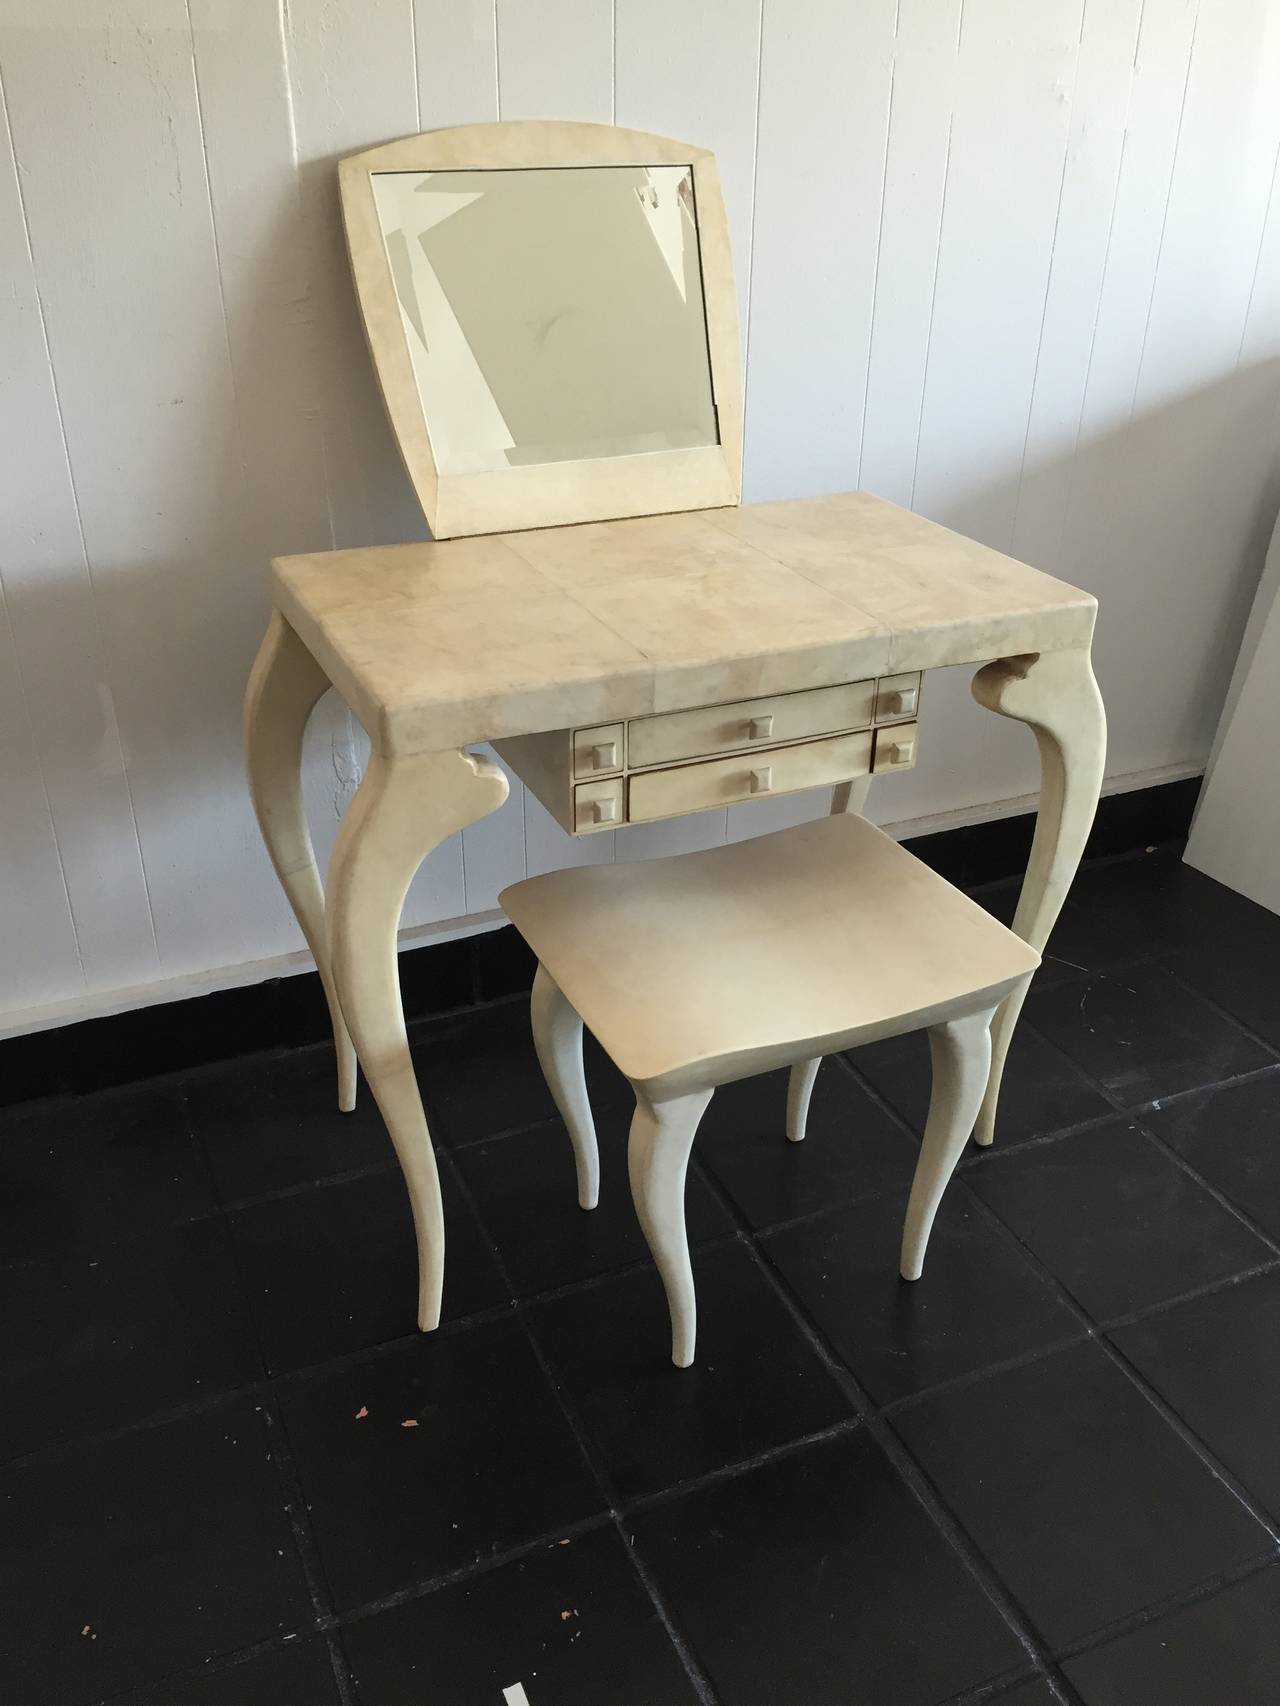 Sexy French modern vanity with stylized cabriole legs. Finished in tiled parchment with hinged mirror, floating drawers and matching stool. Height of the vanity with the mirror upright is 49 H